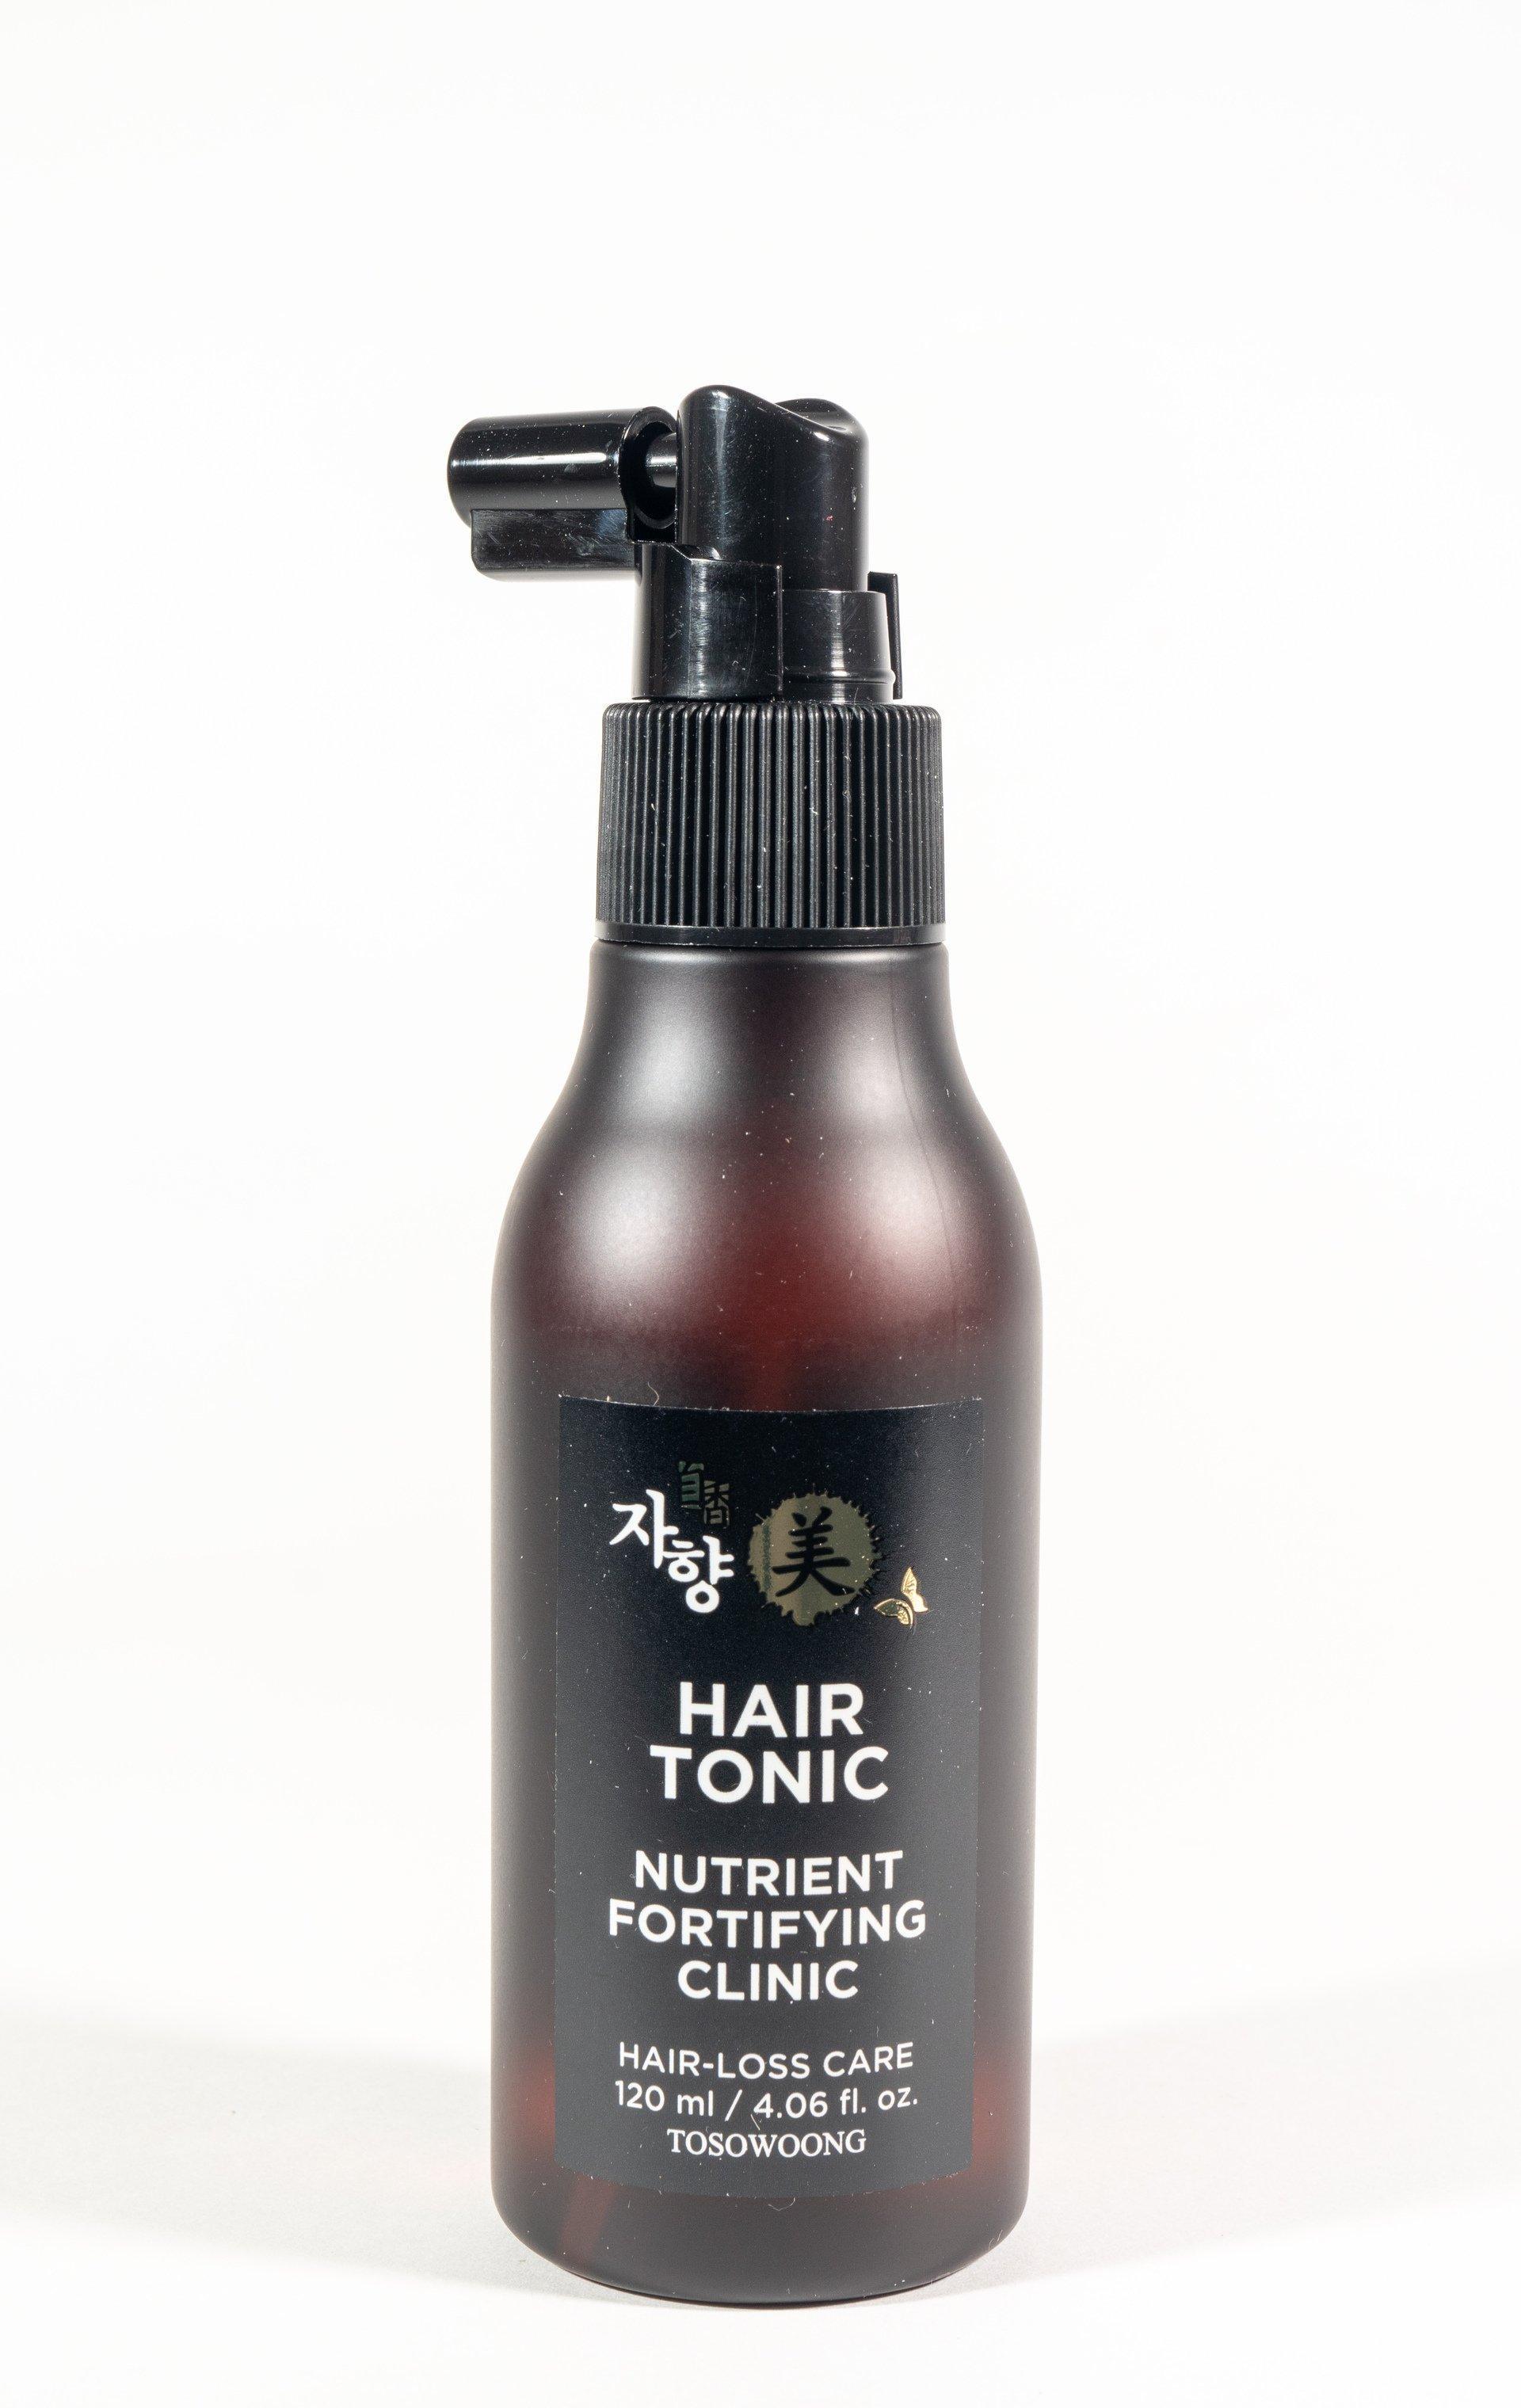 TOSOWOONG Nutrient Fortifying Clinic Hair-Loss Care Hair Tonic 120ml